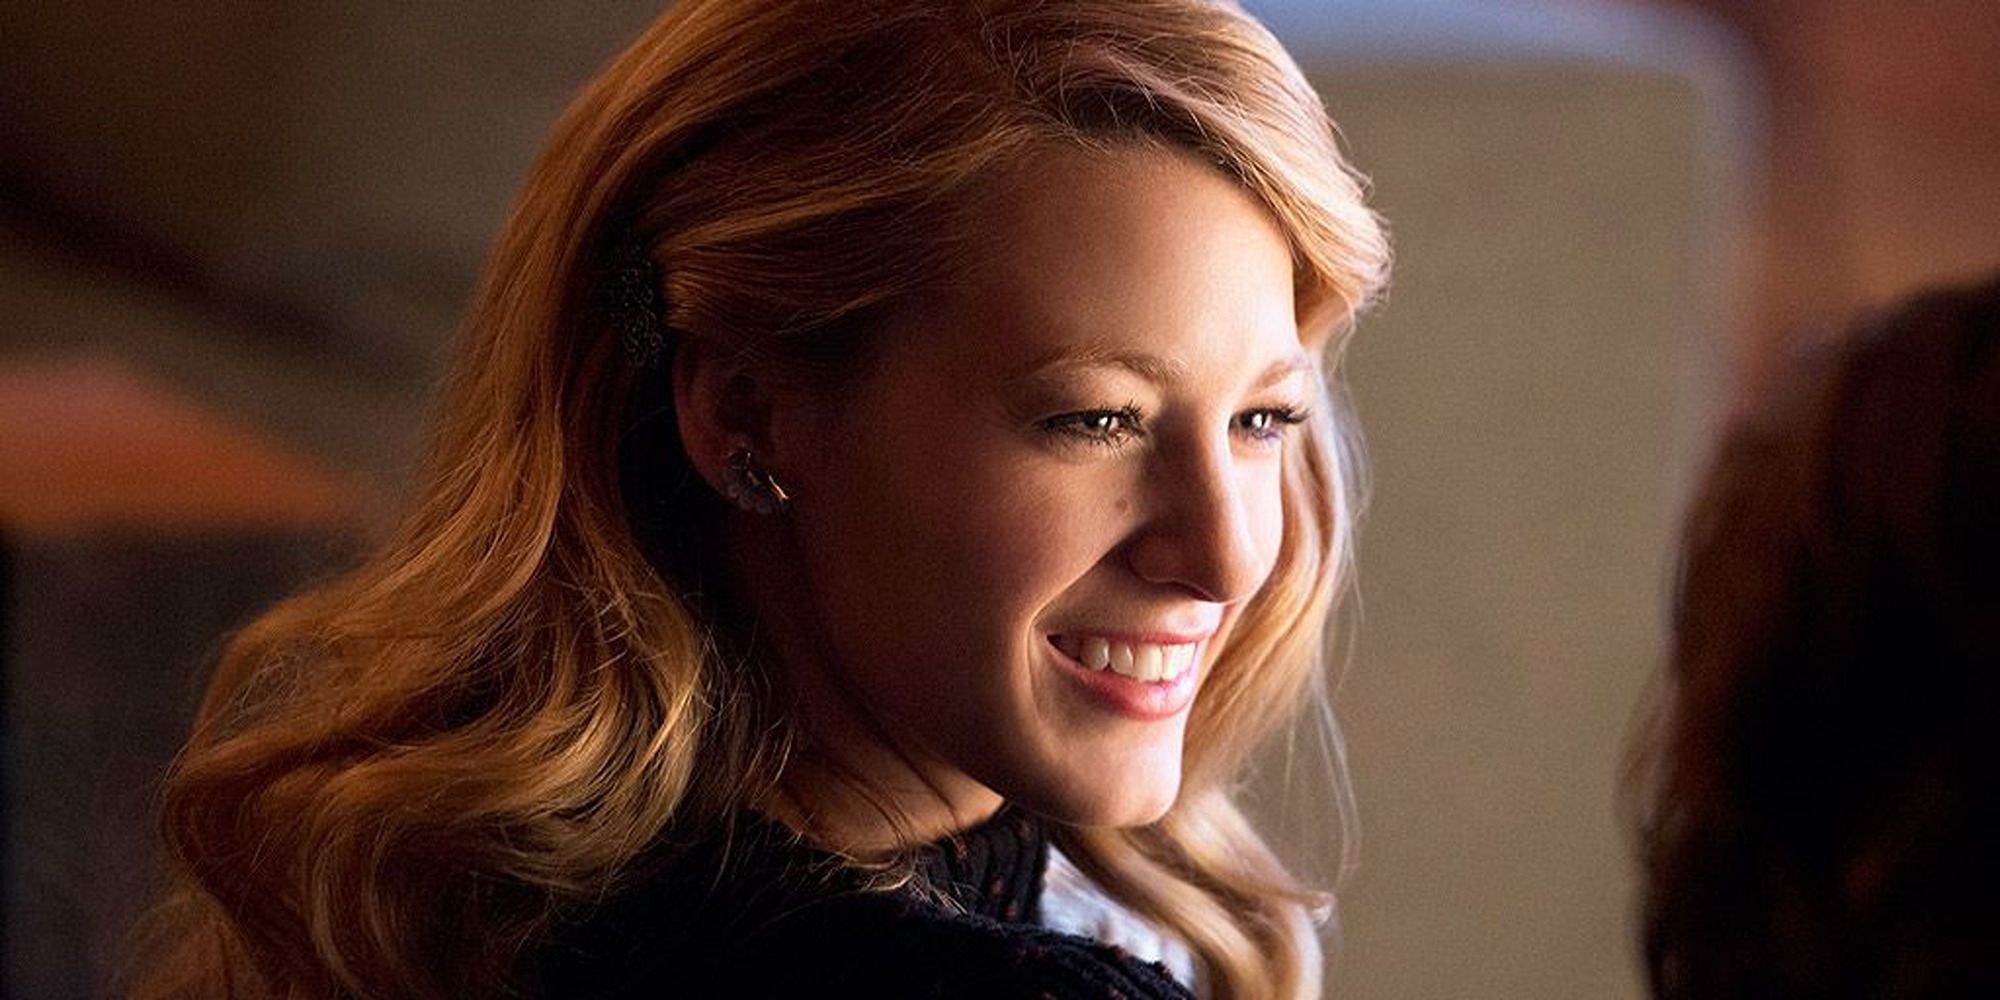 Blake Lively in 'The Age of Adaline', looking at someone next to her